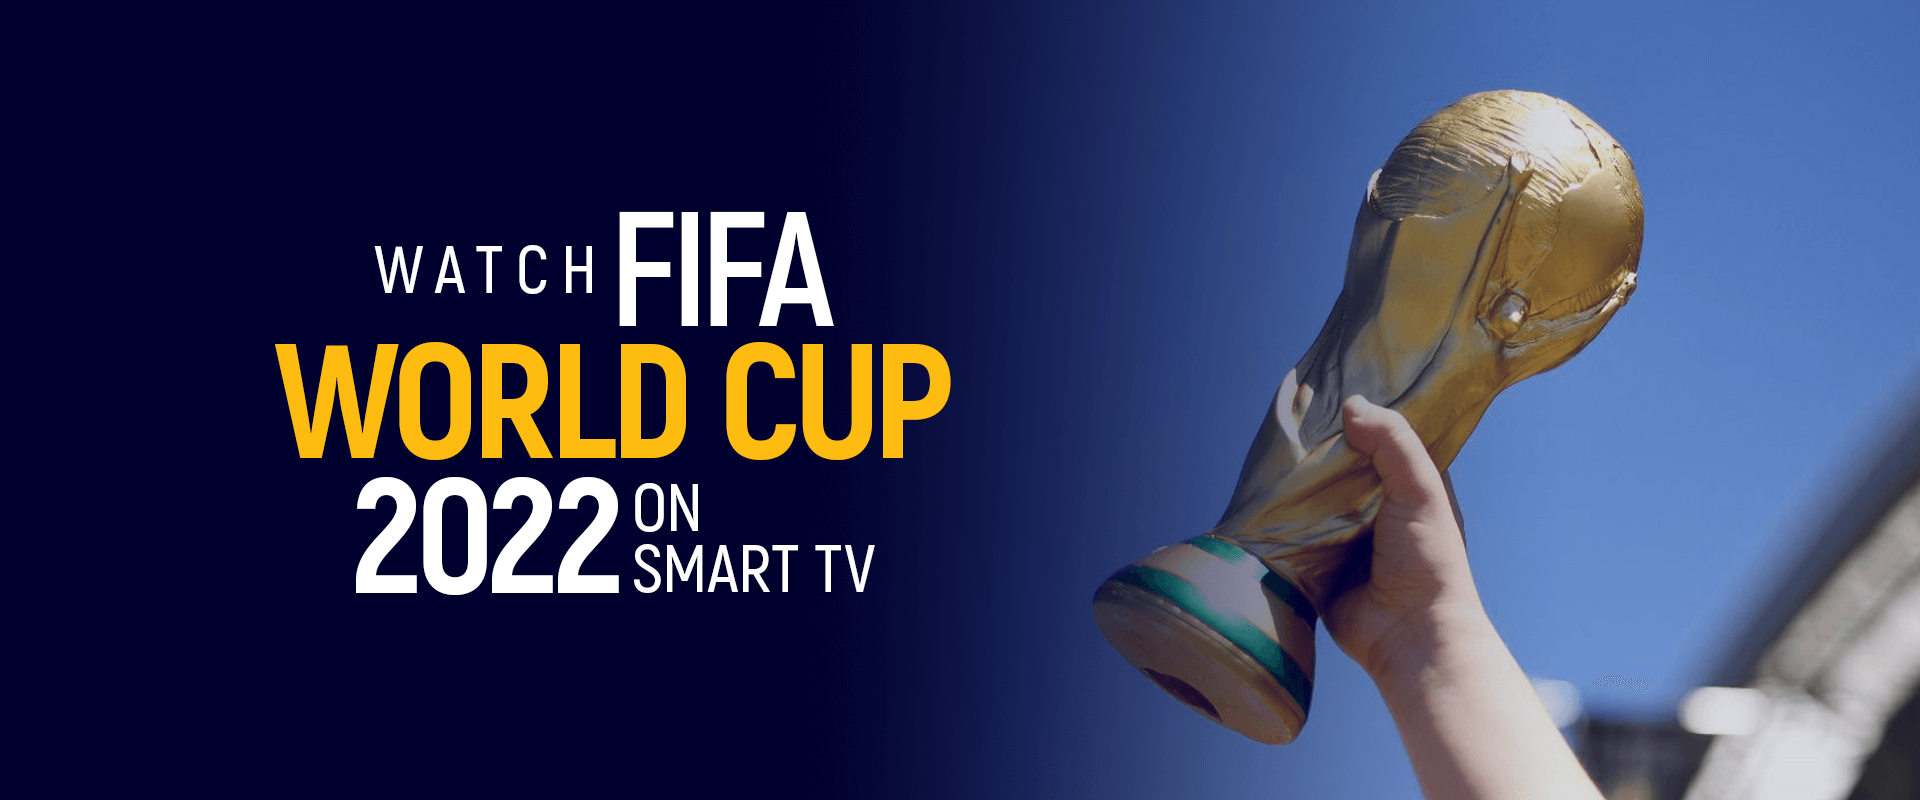 How to Watch FIFA World Cup 2022 on Smart TV